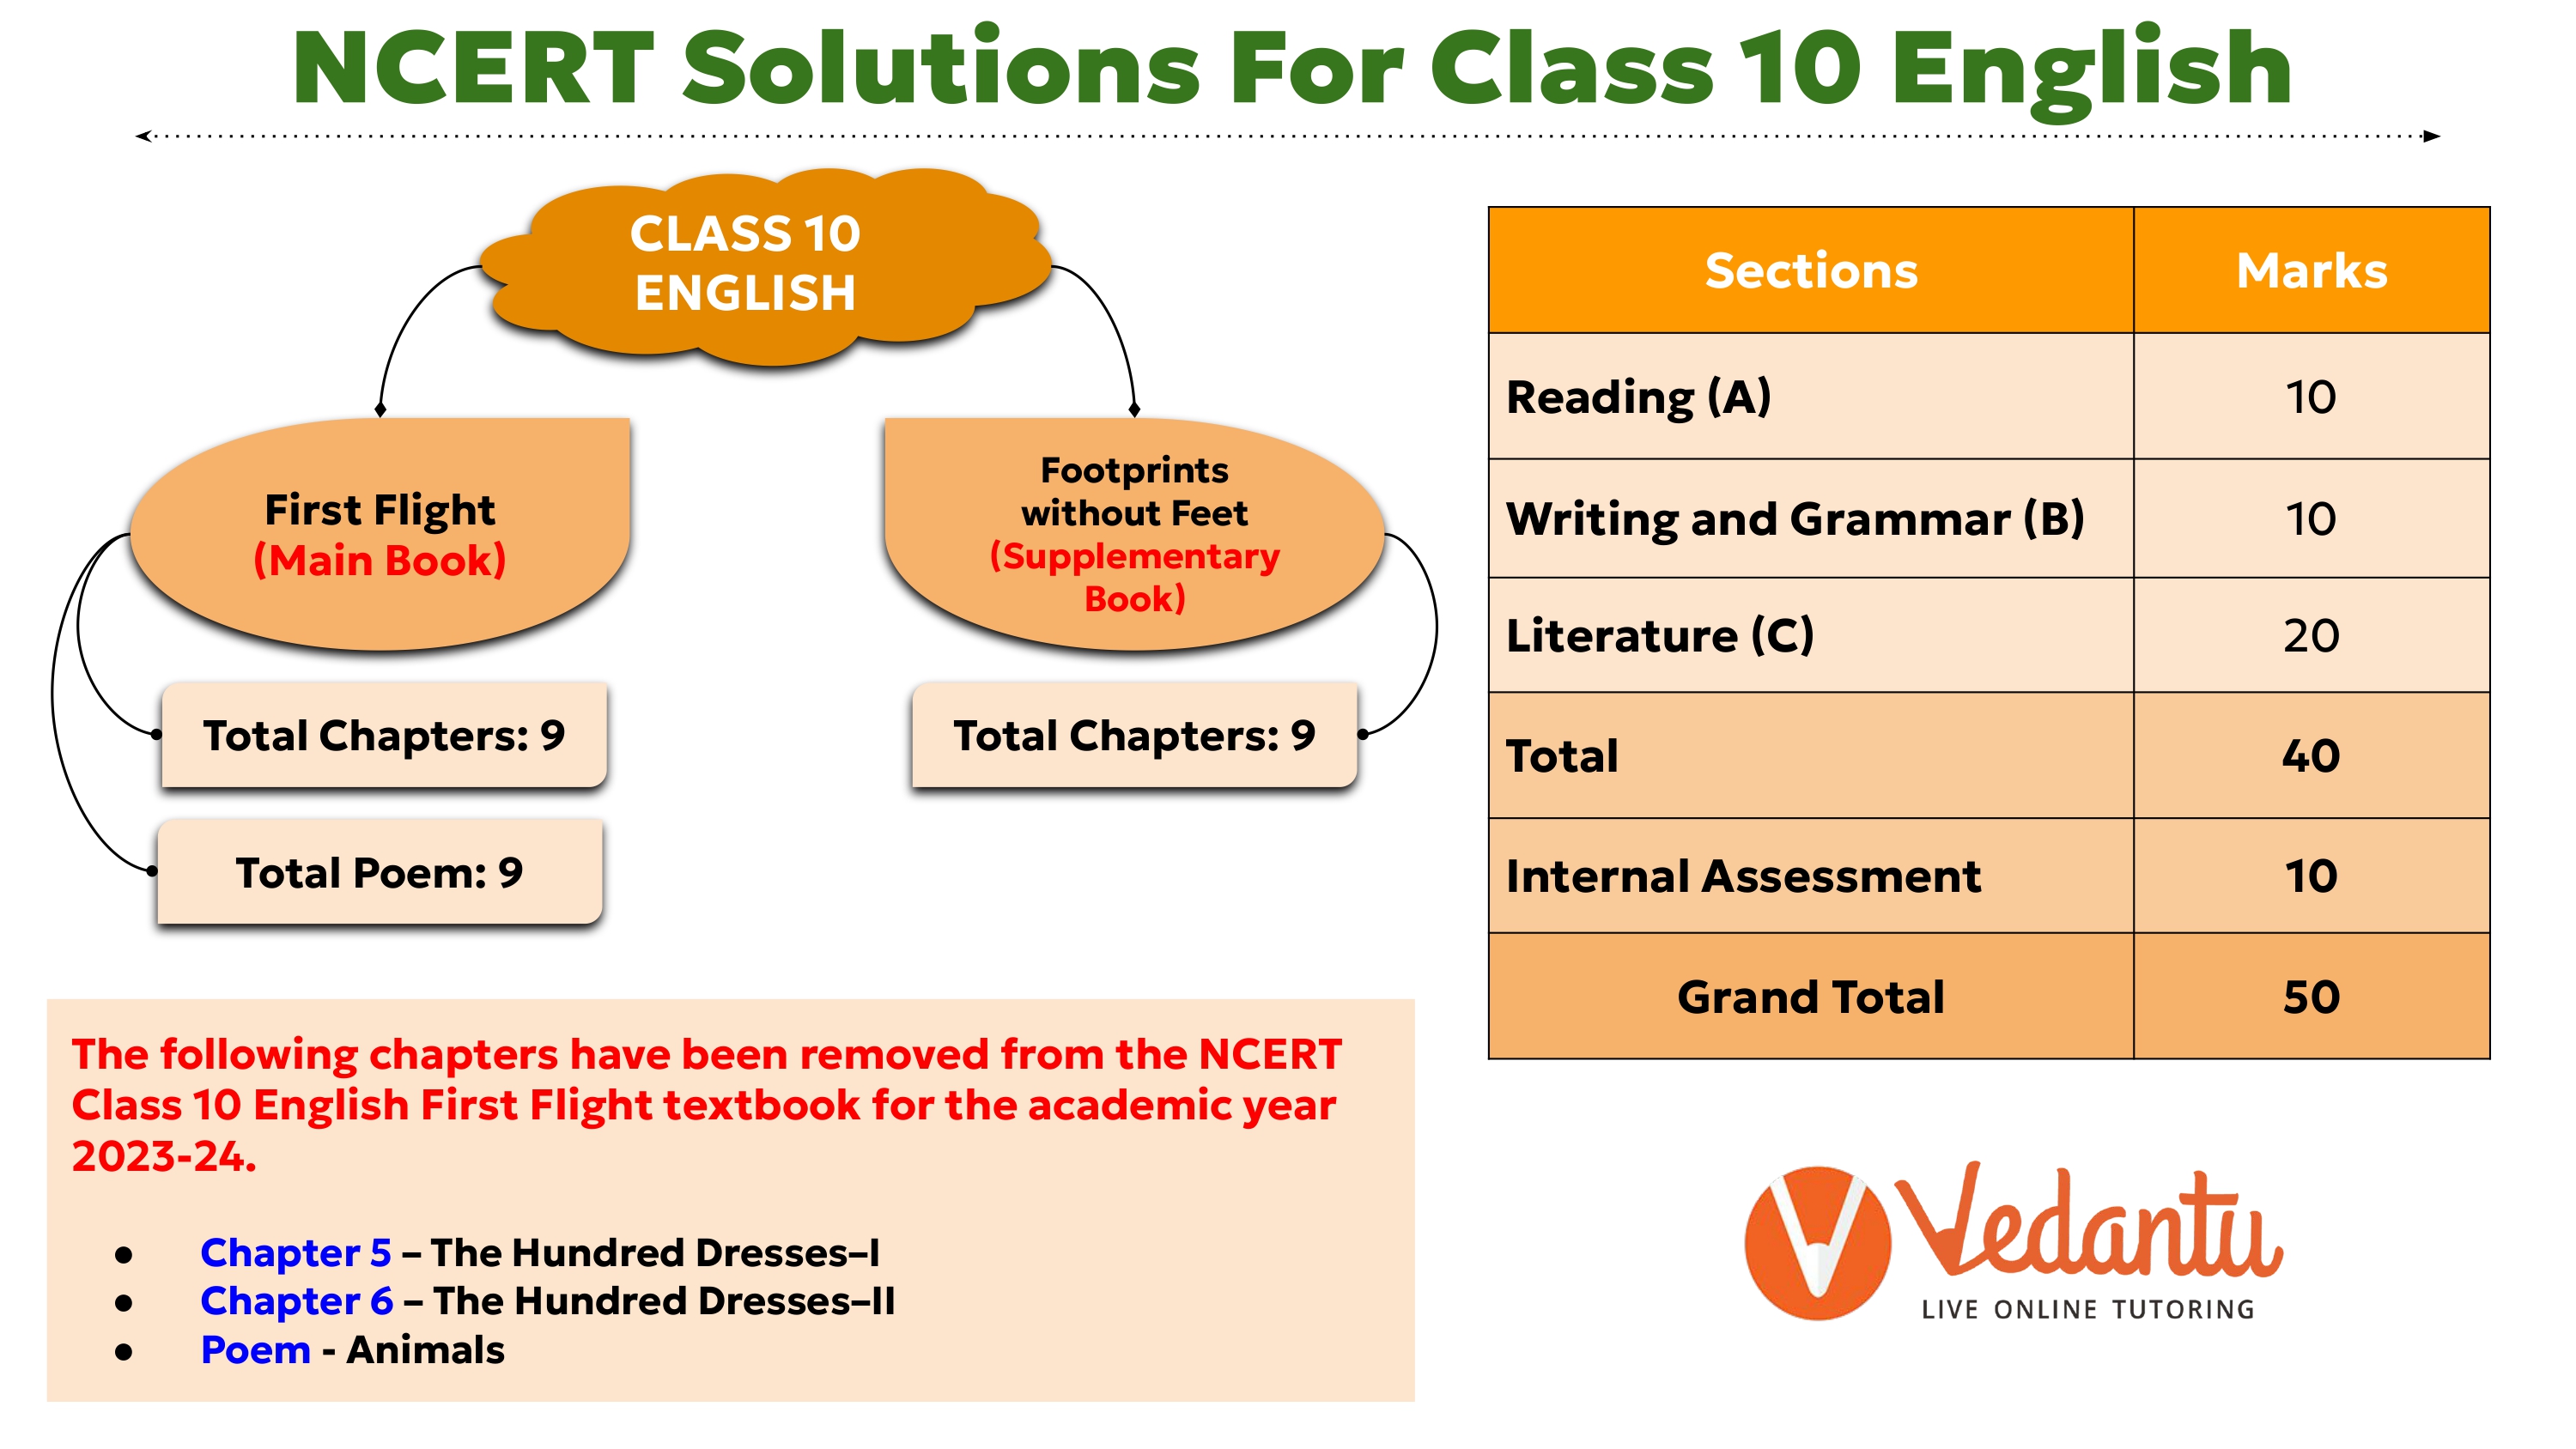 NCERT Solutions for Class 10 English - First Flight (Main Book) and Footprints without Feet (Supplementary Book) with chapter-wise marks distribution and removed chapters for academic year 2023-2024